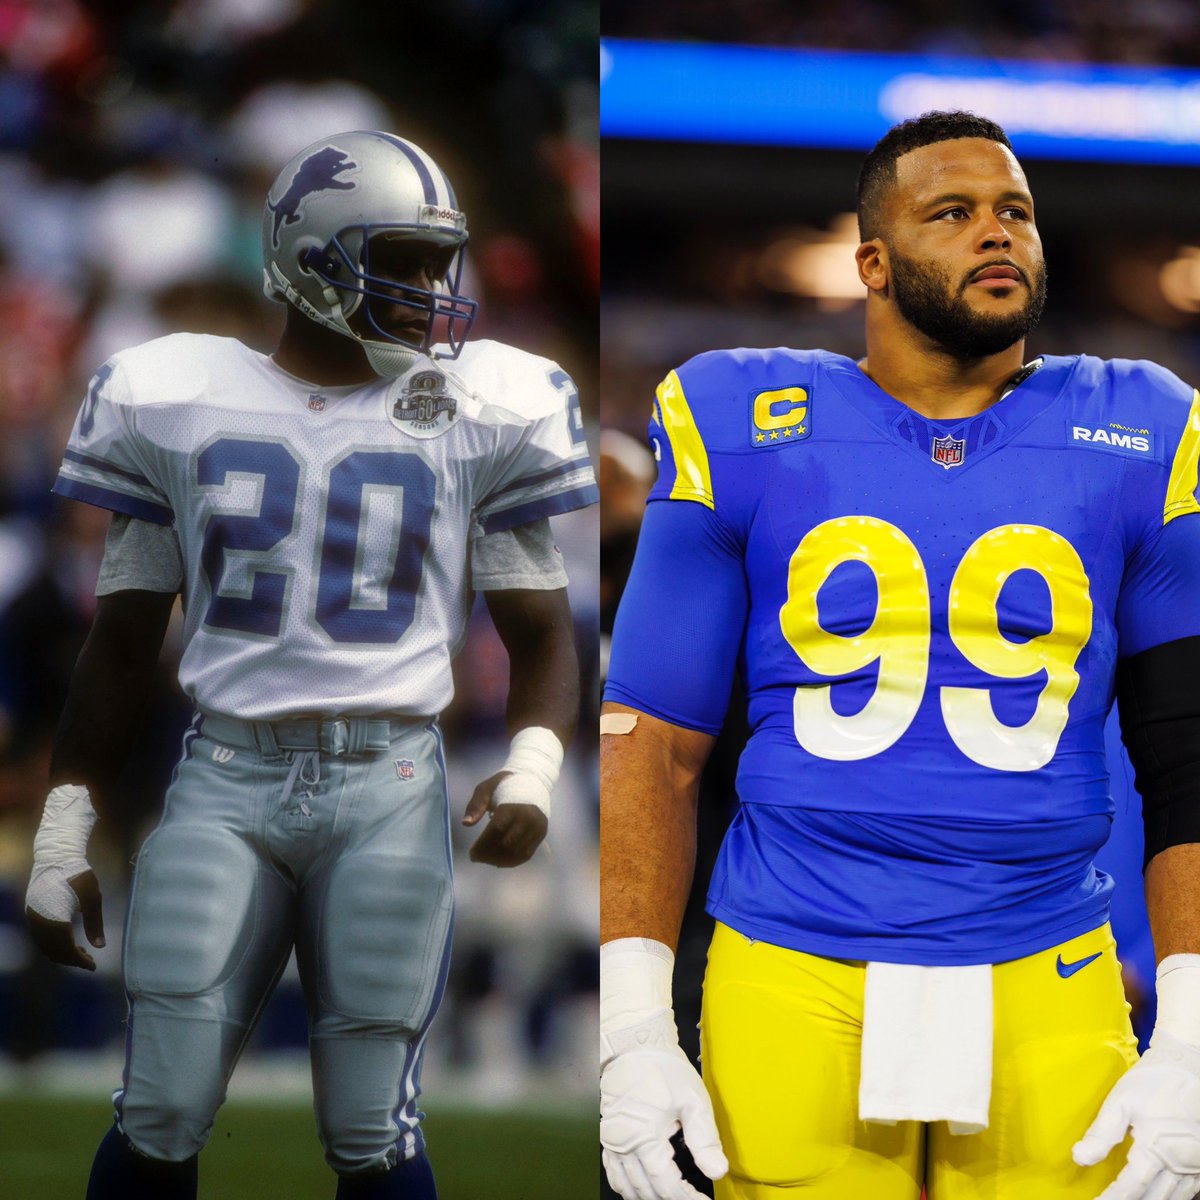 Aaron Donald and Barry Sanders are the only players in NFL history to play at least 10 seasons and get selected to the Pro Bowl in each season, per ESPN’s @EpKap. Like Donald, Sanders also played exactly 10 seasons.